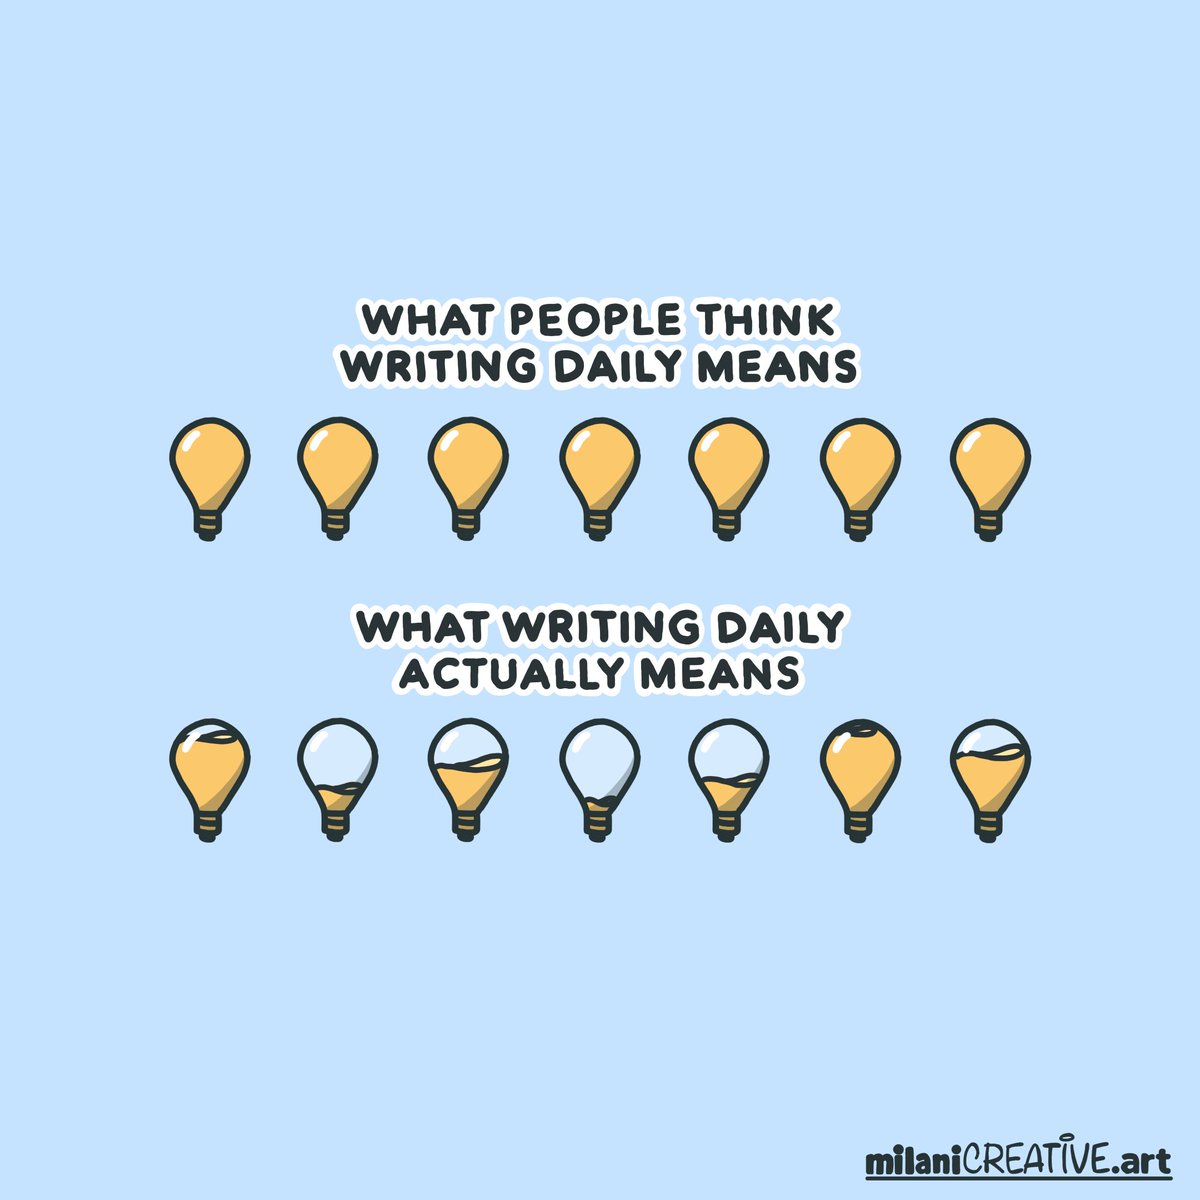 What writing daily means.